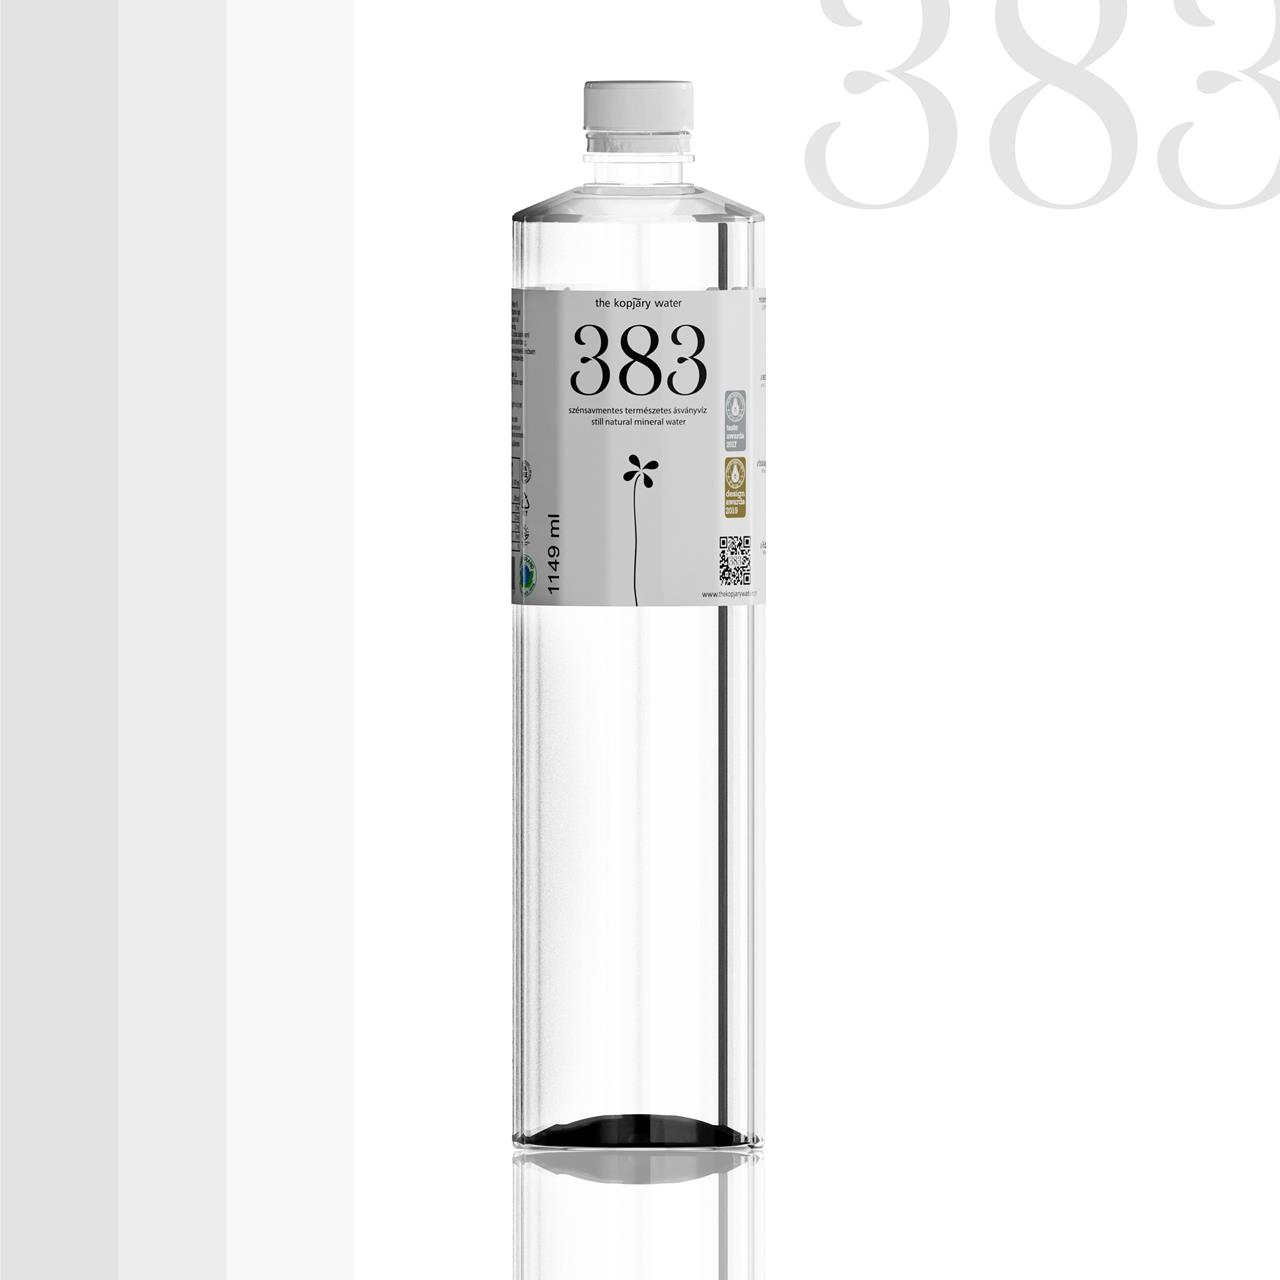 383 THE KOPJARY WATER, 1149 ml